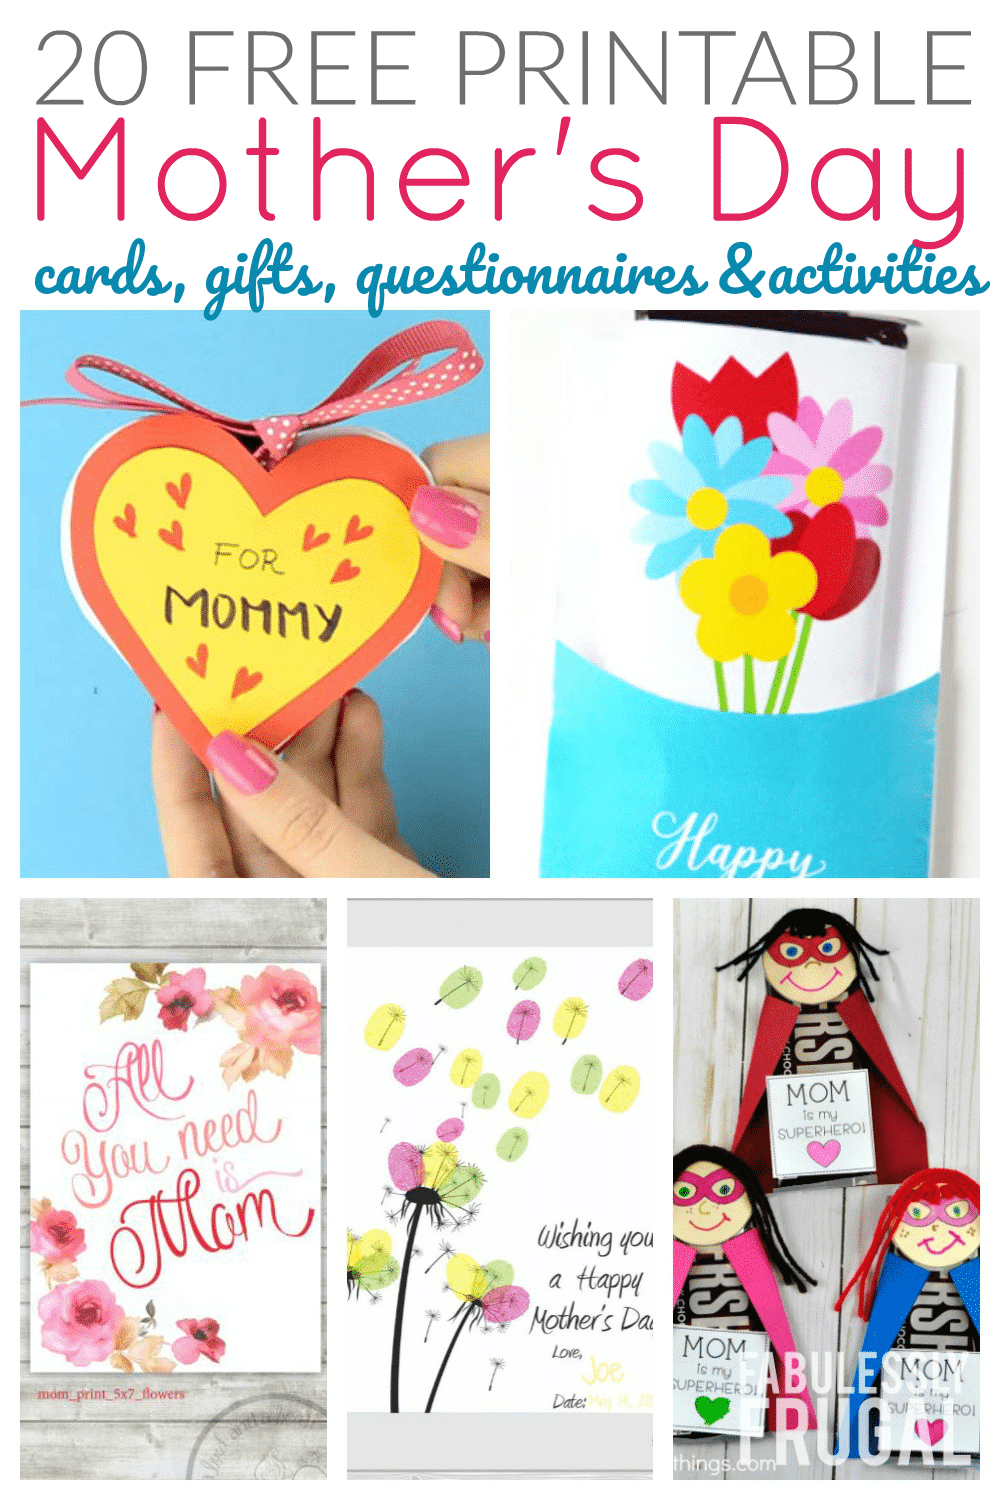 20 Free Printable Mother's Day Cards To Make At Home - Fabulessly Frugal - Make Mother Day Card Online Free Printable